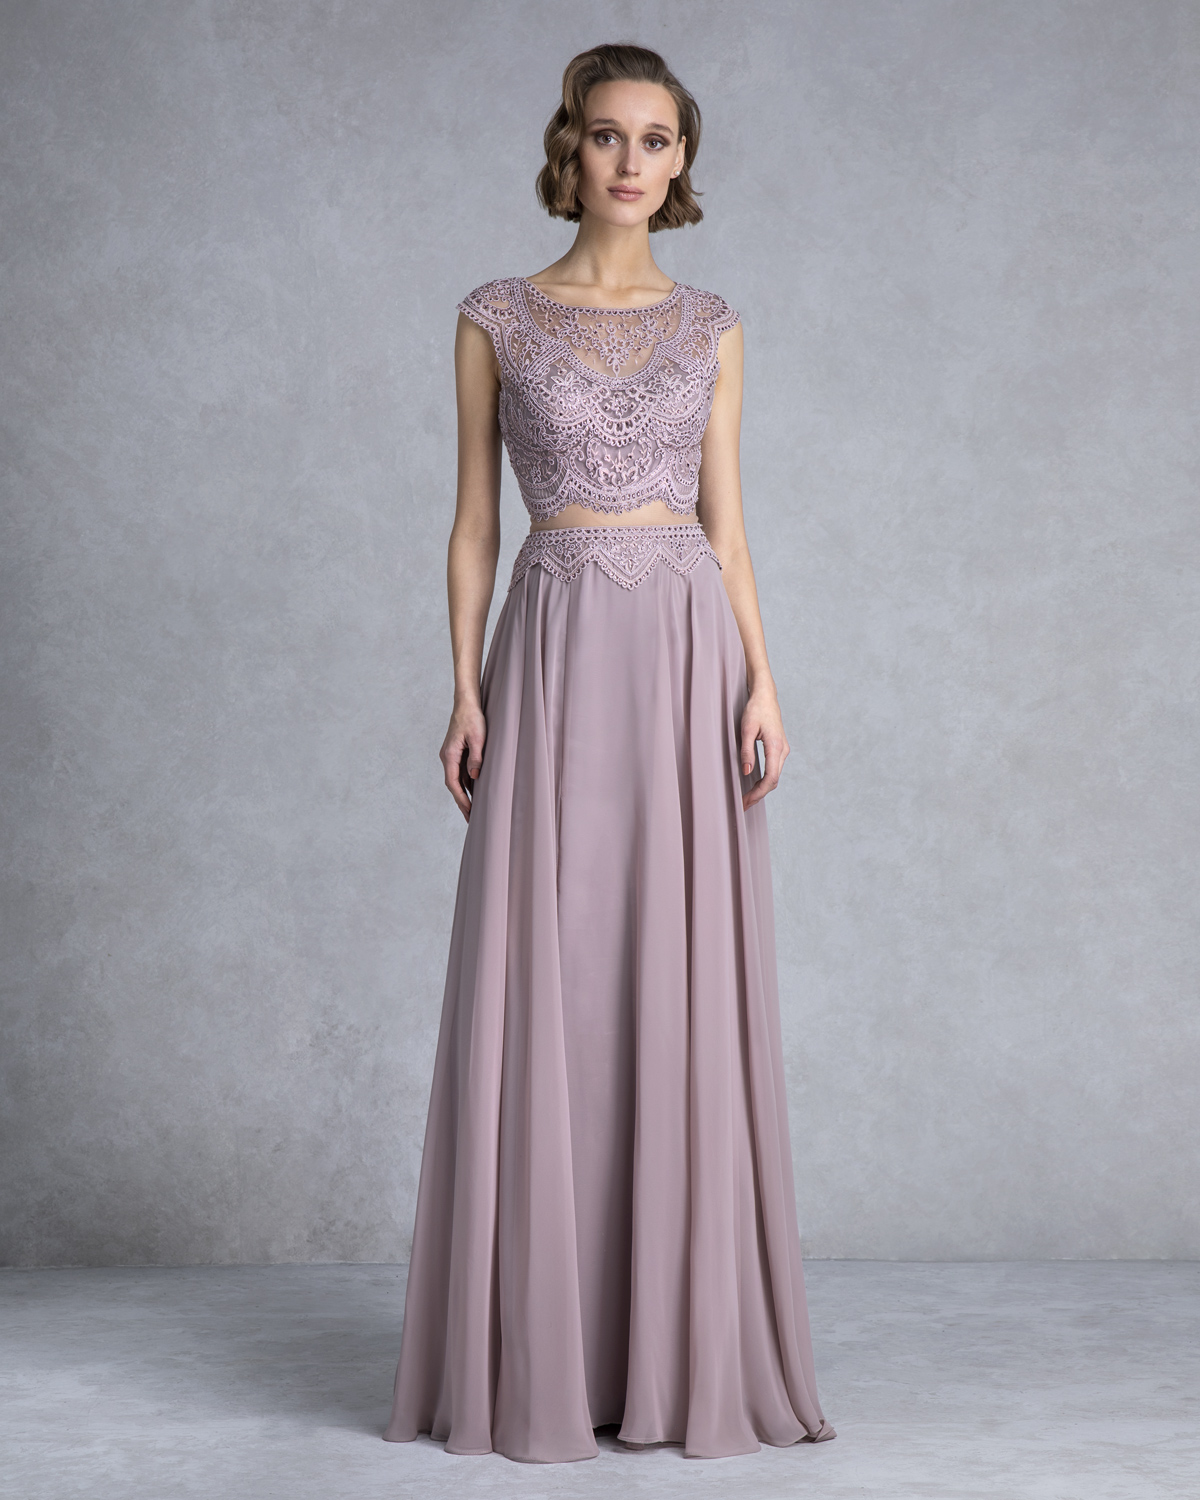 Вечерние платья / Long evening dress with lace and beading on the top